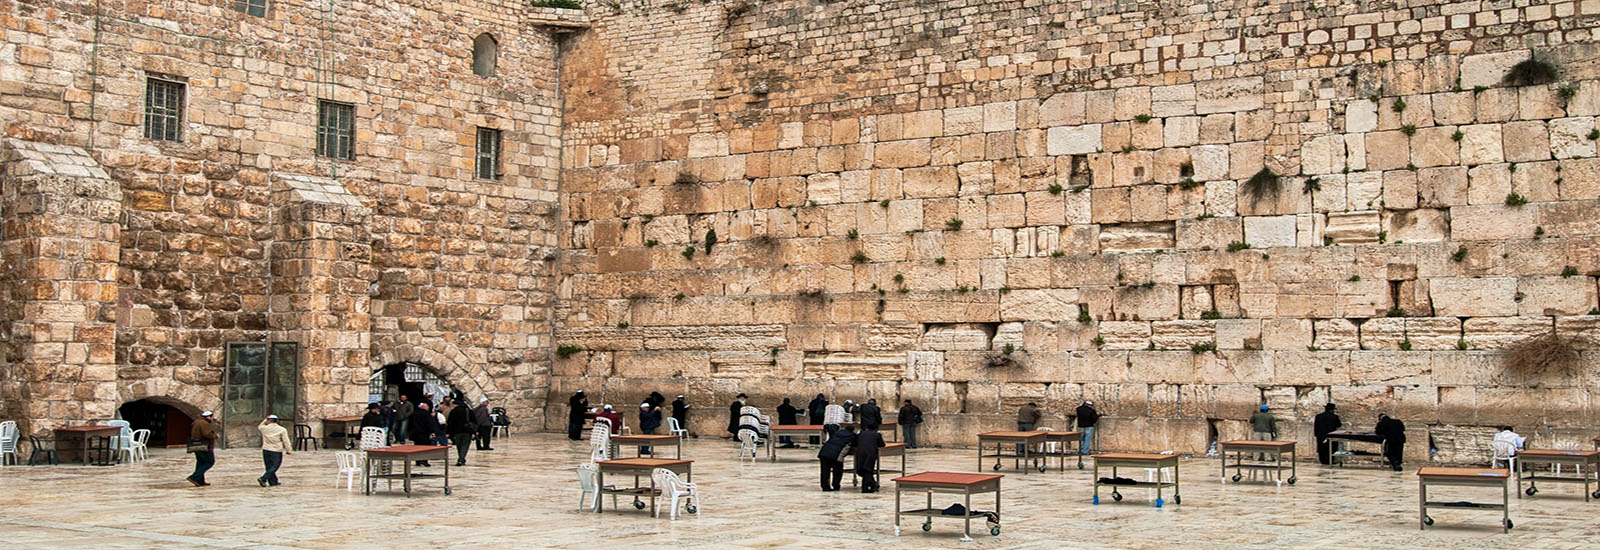 This is a stock photo. The Western Wall in Jerusalem.